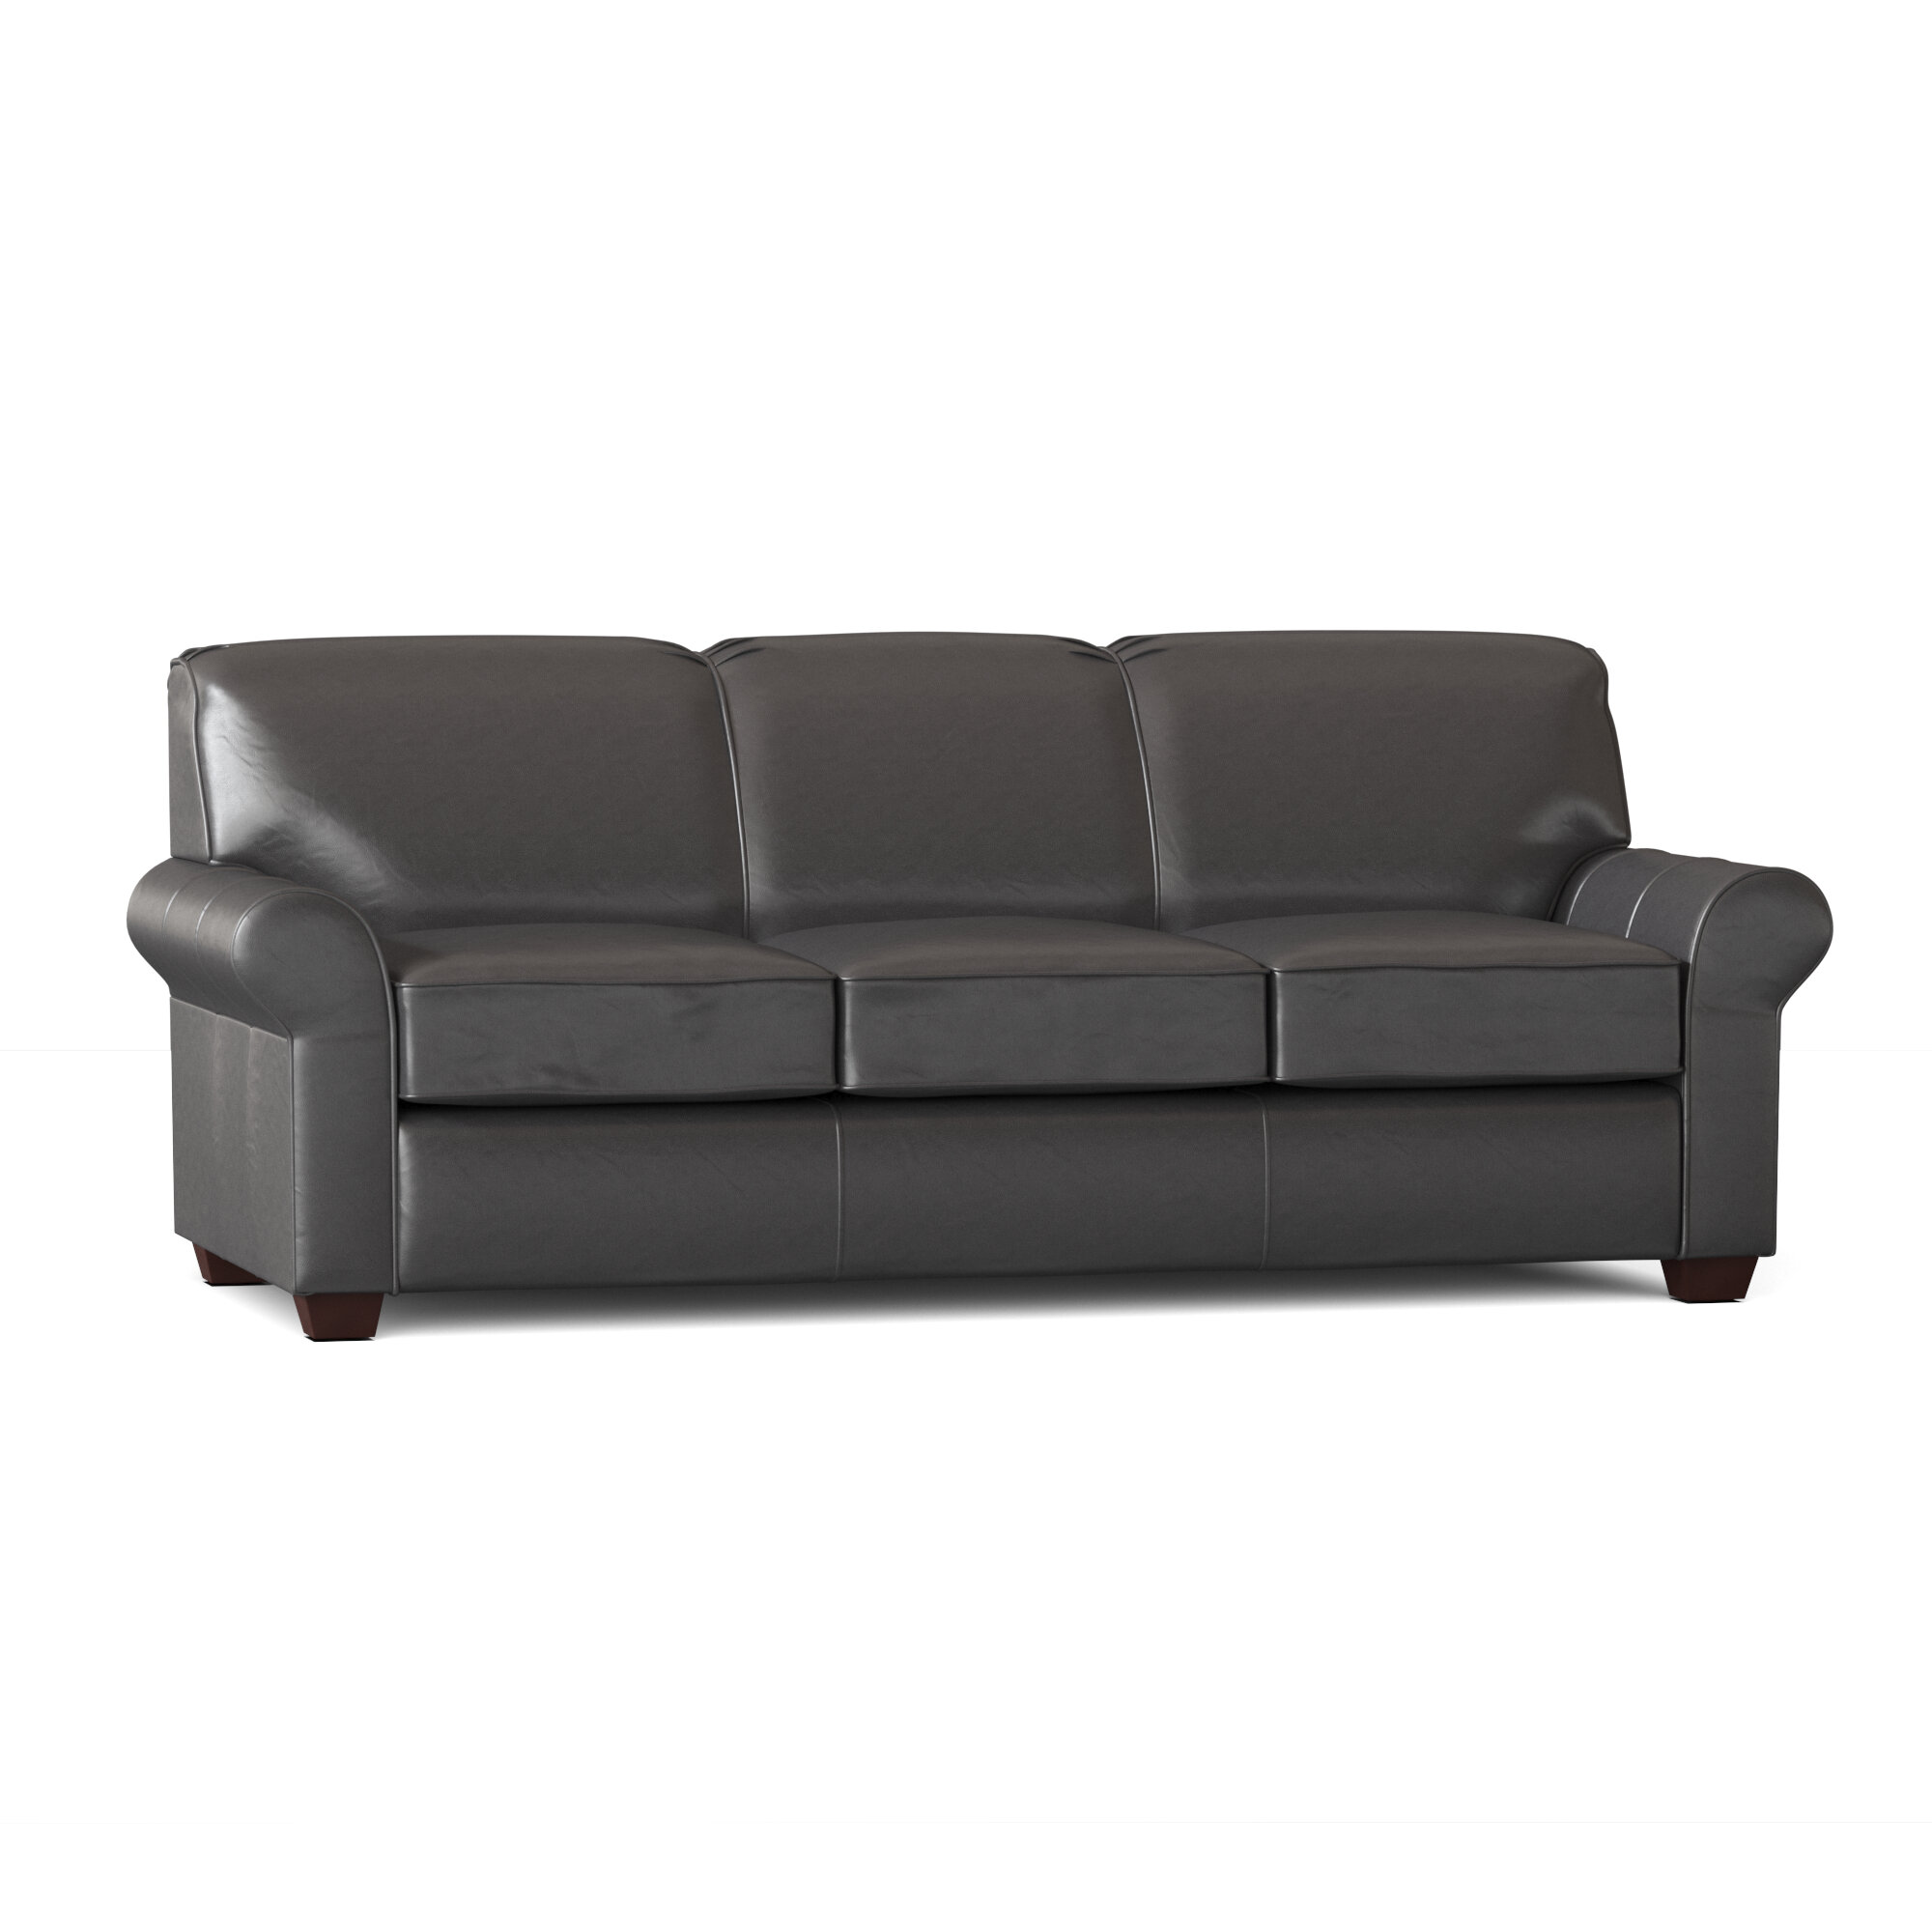 Rasberry 81” Rolled Arm Sofa Bed